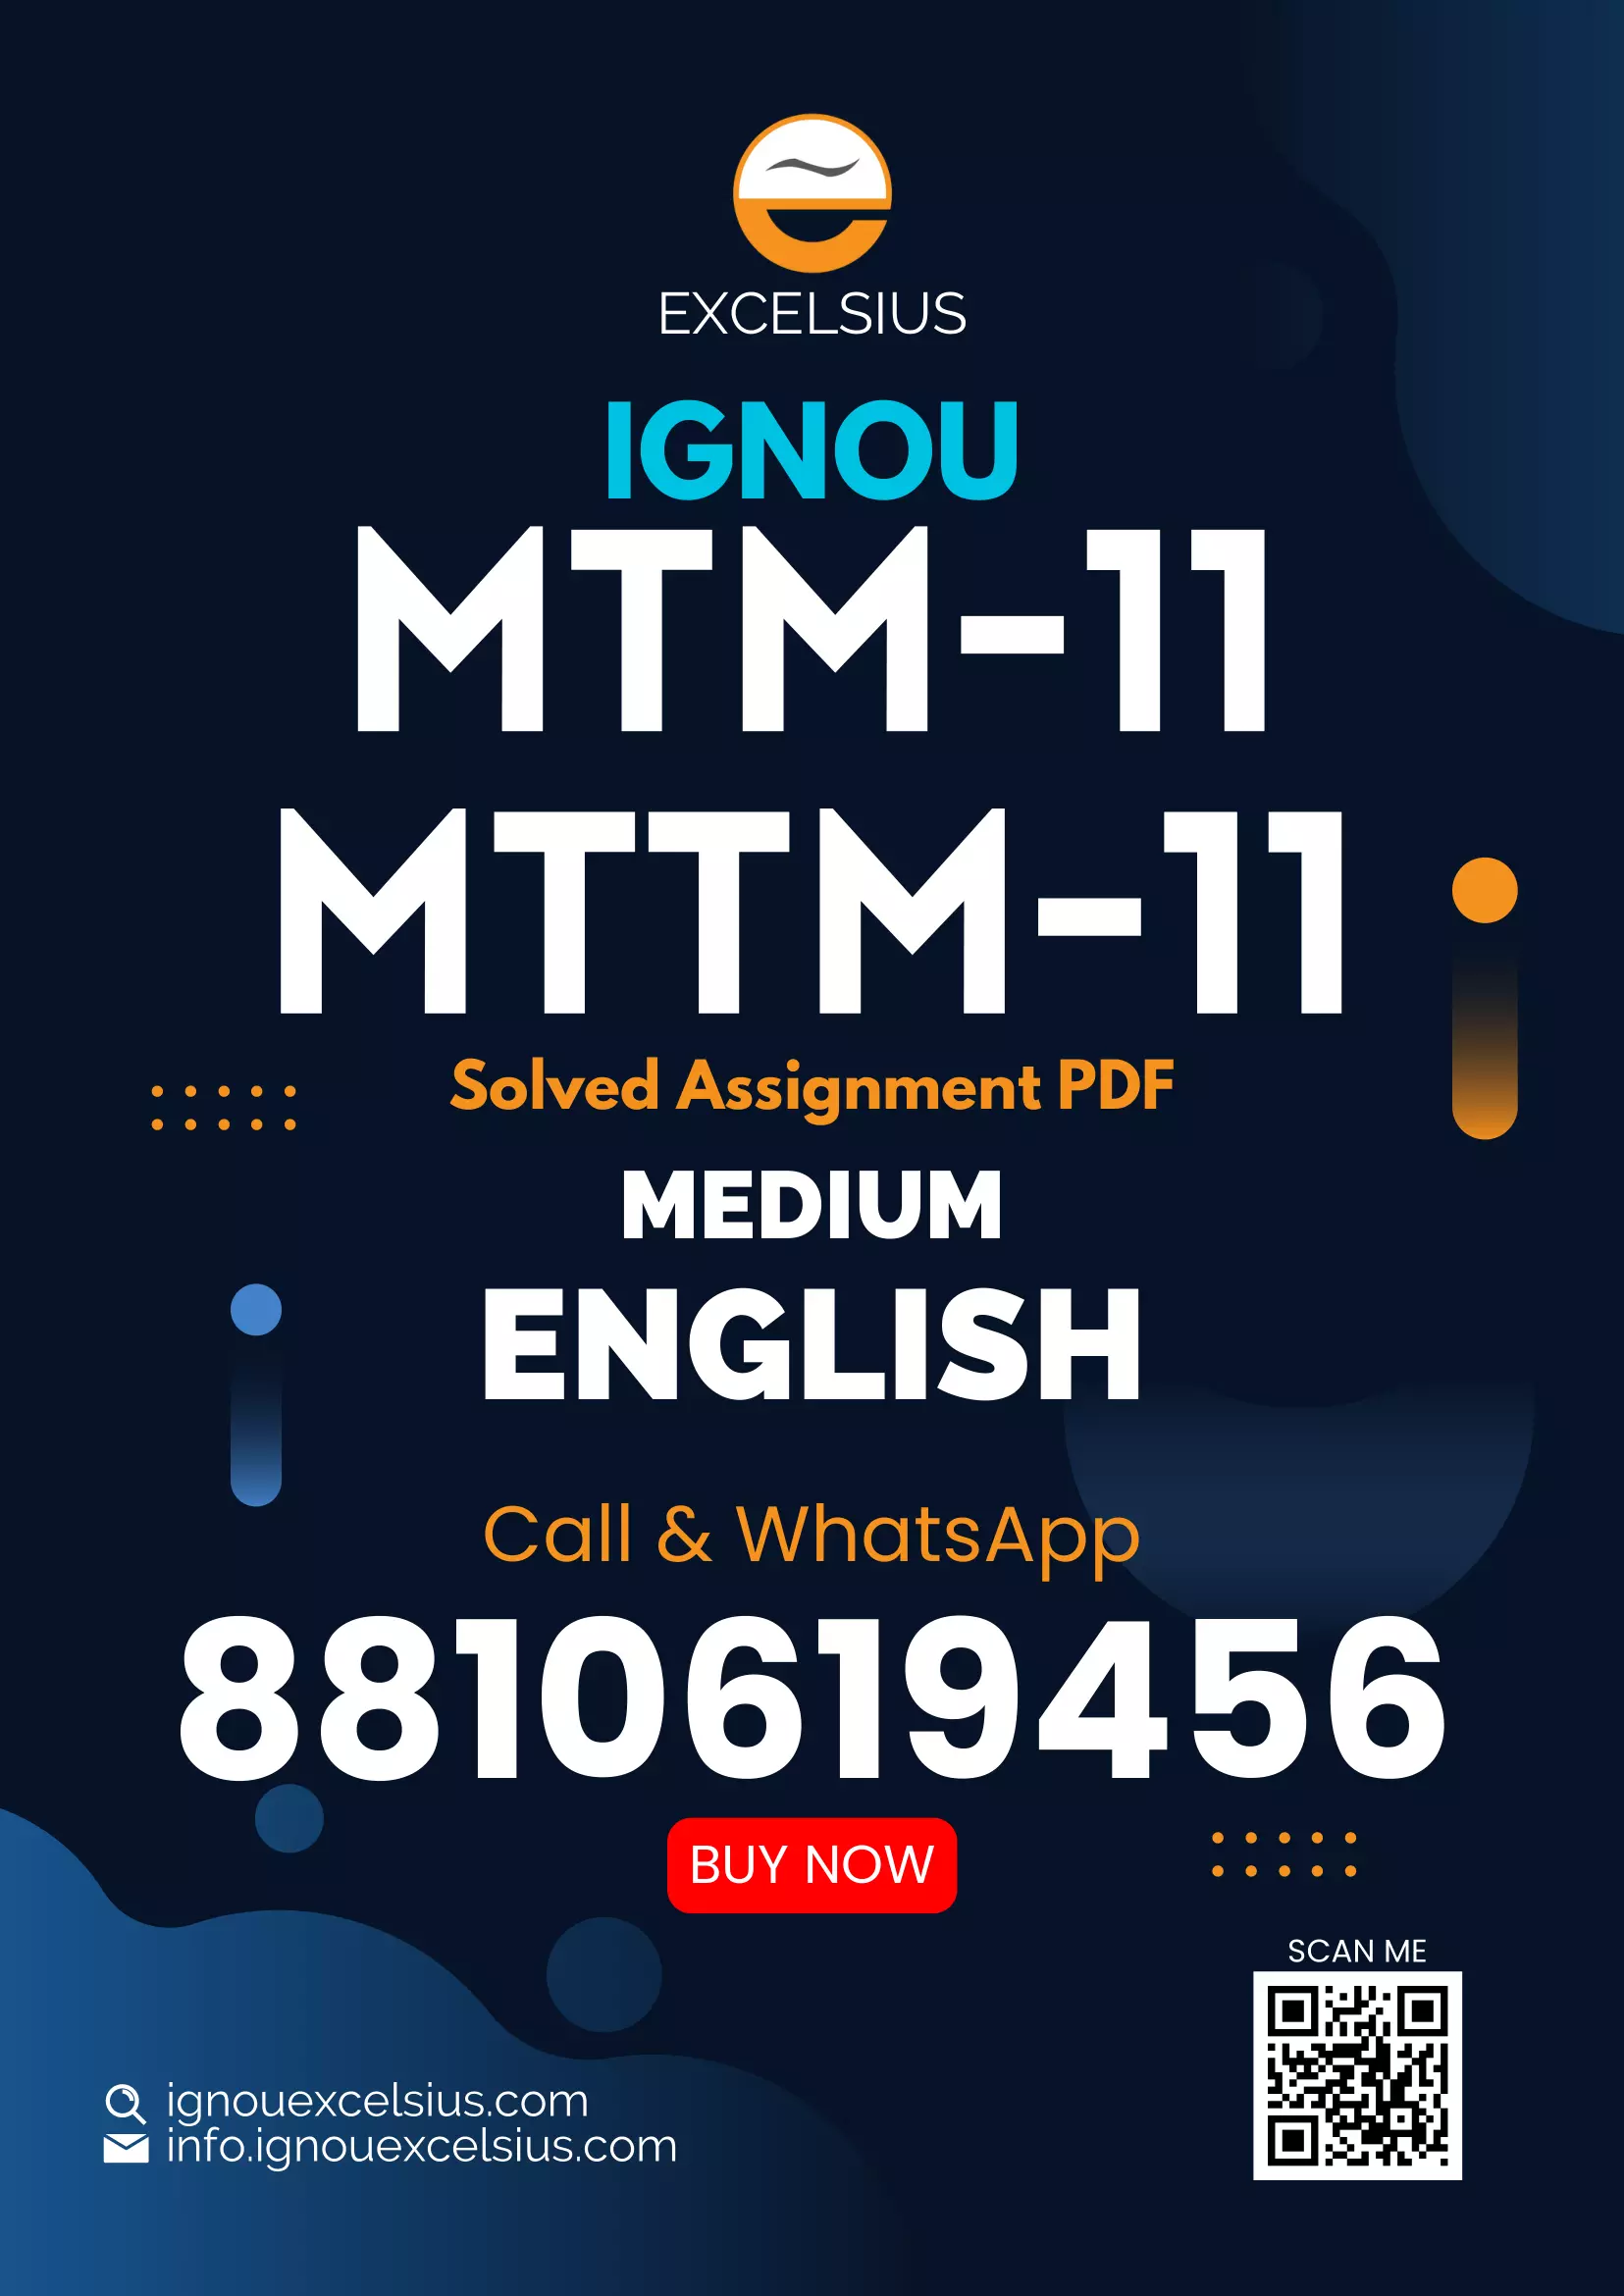 IGNOU MTM-11/MTTM-11 - Tourism Planning and Development, Latest Solved Assignment-January 2023 - July 2023